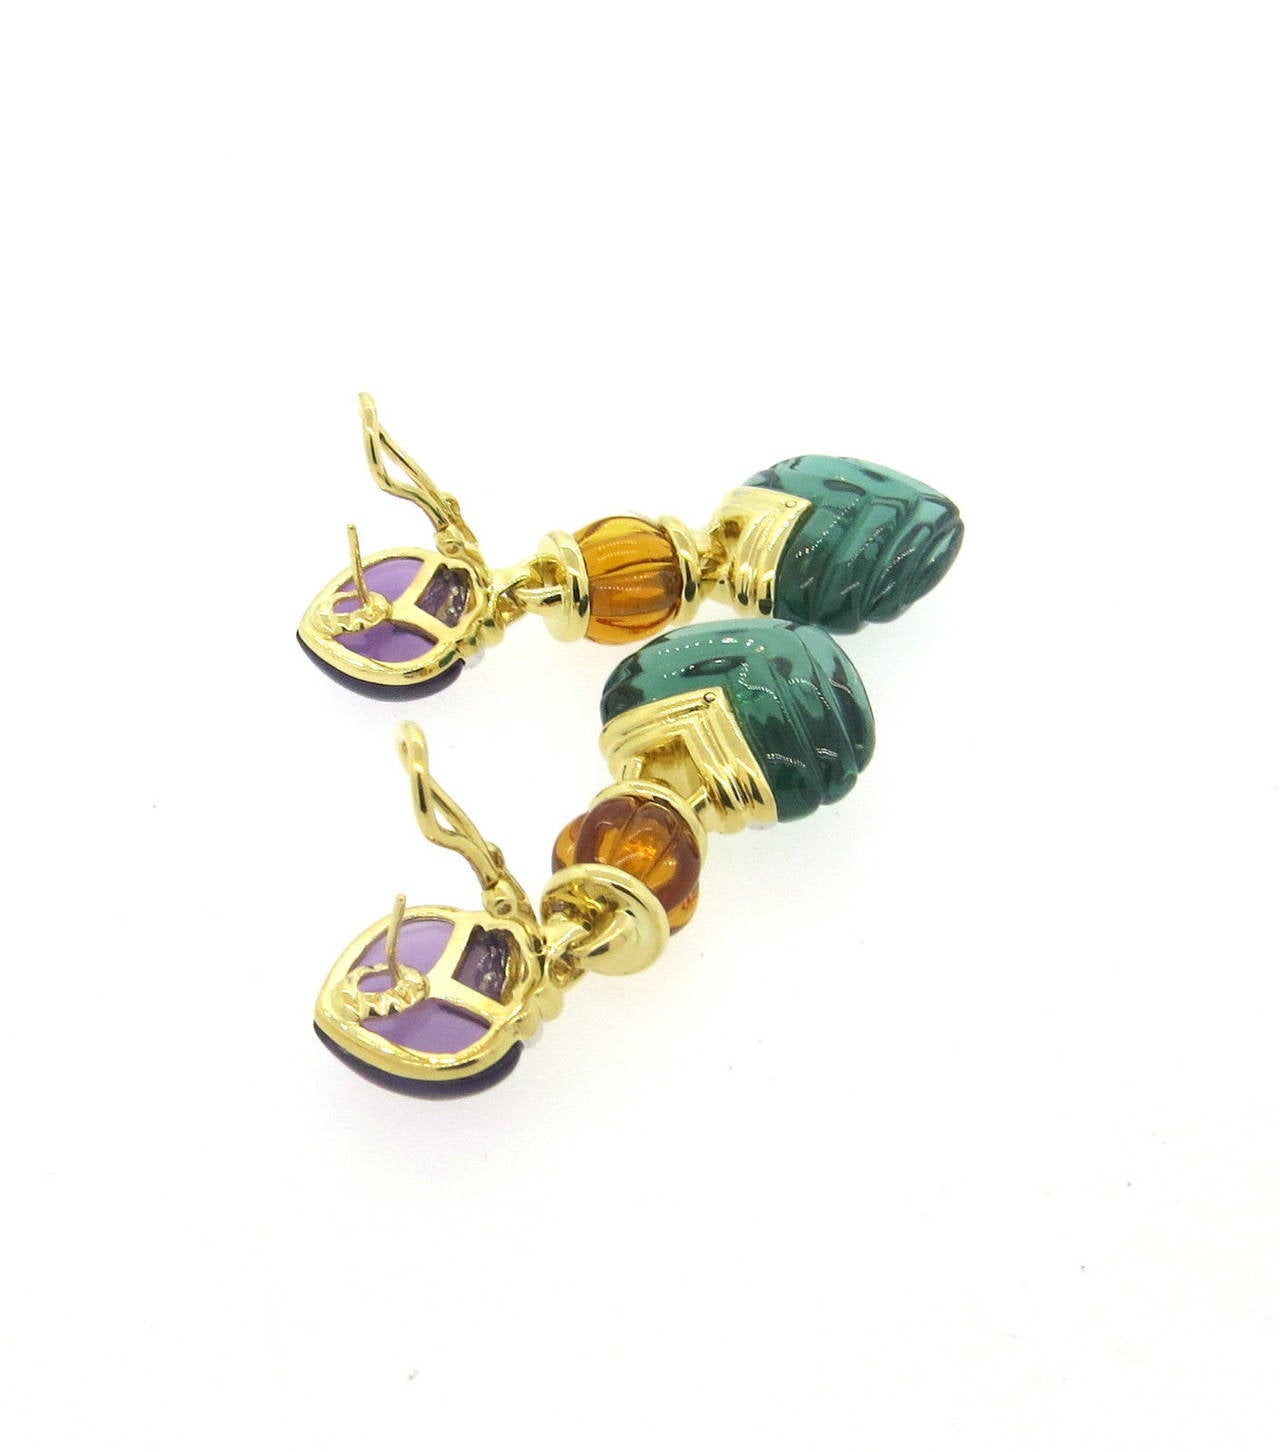 Colorful 18k gold drop earrings, crafted by Diane von Furstenberg, set with carved green amethyst, citrine and amethyst cabochons, decorated with diamonds. Earrings are 66mm long x 23mm wide. Weight - 38.8 grams